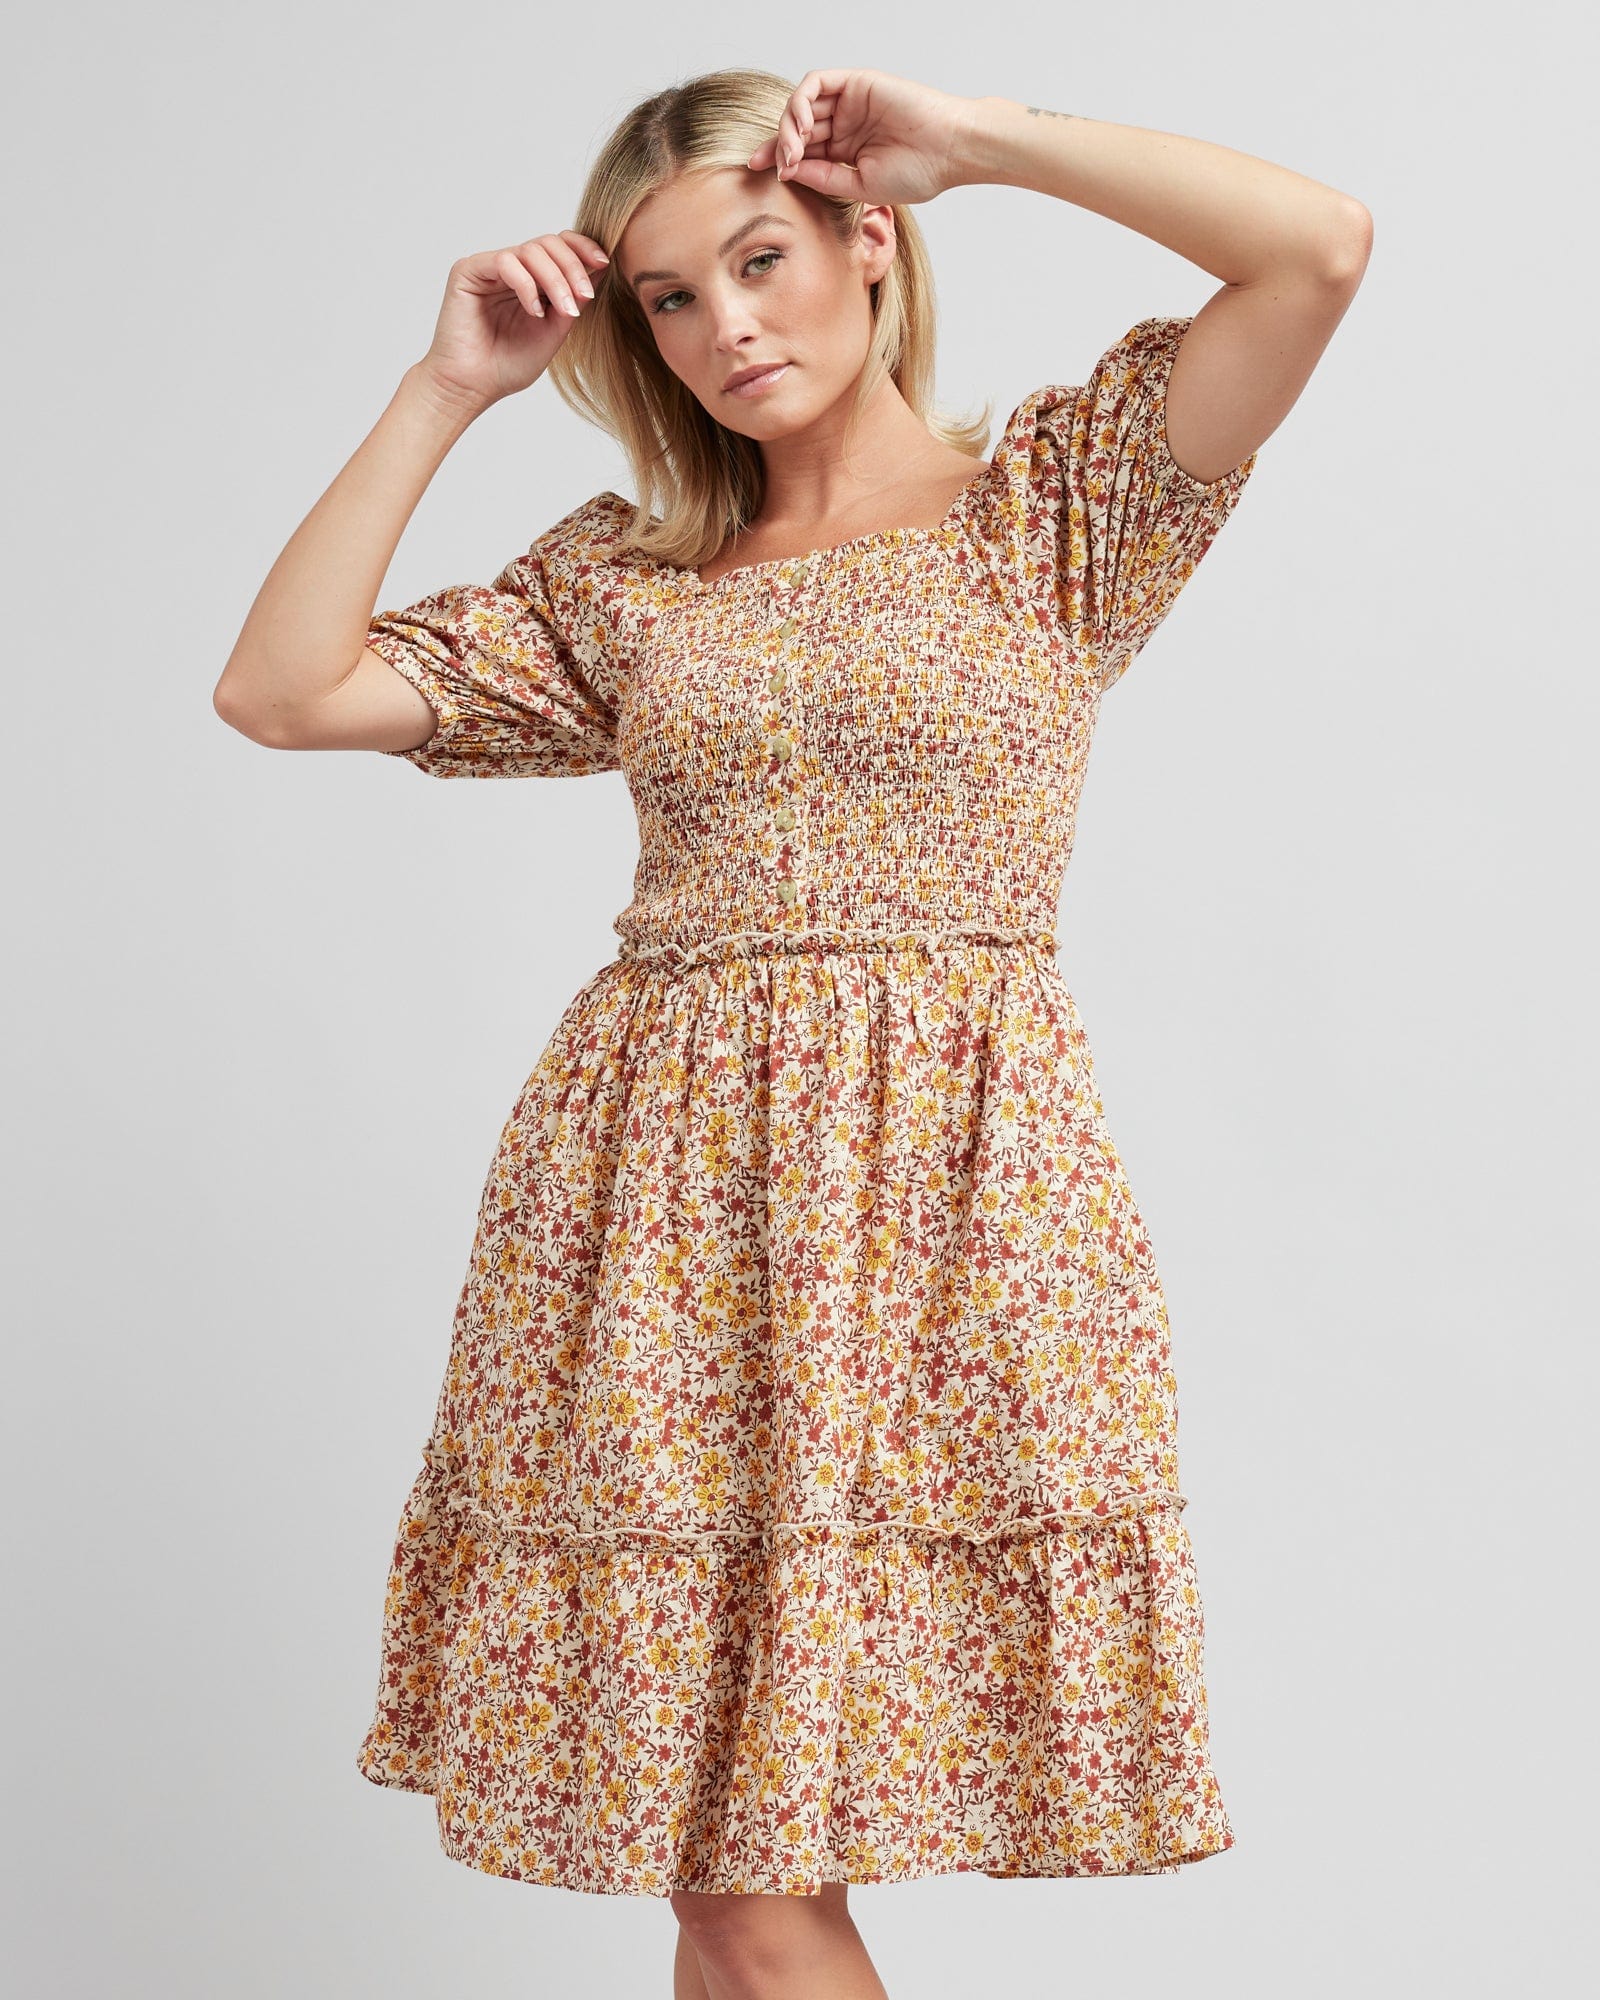 Woman in a short puffed sleeve, knee-length, floral printed dress